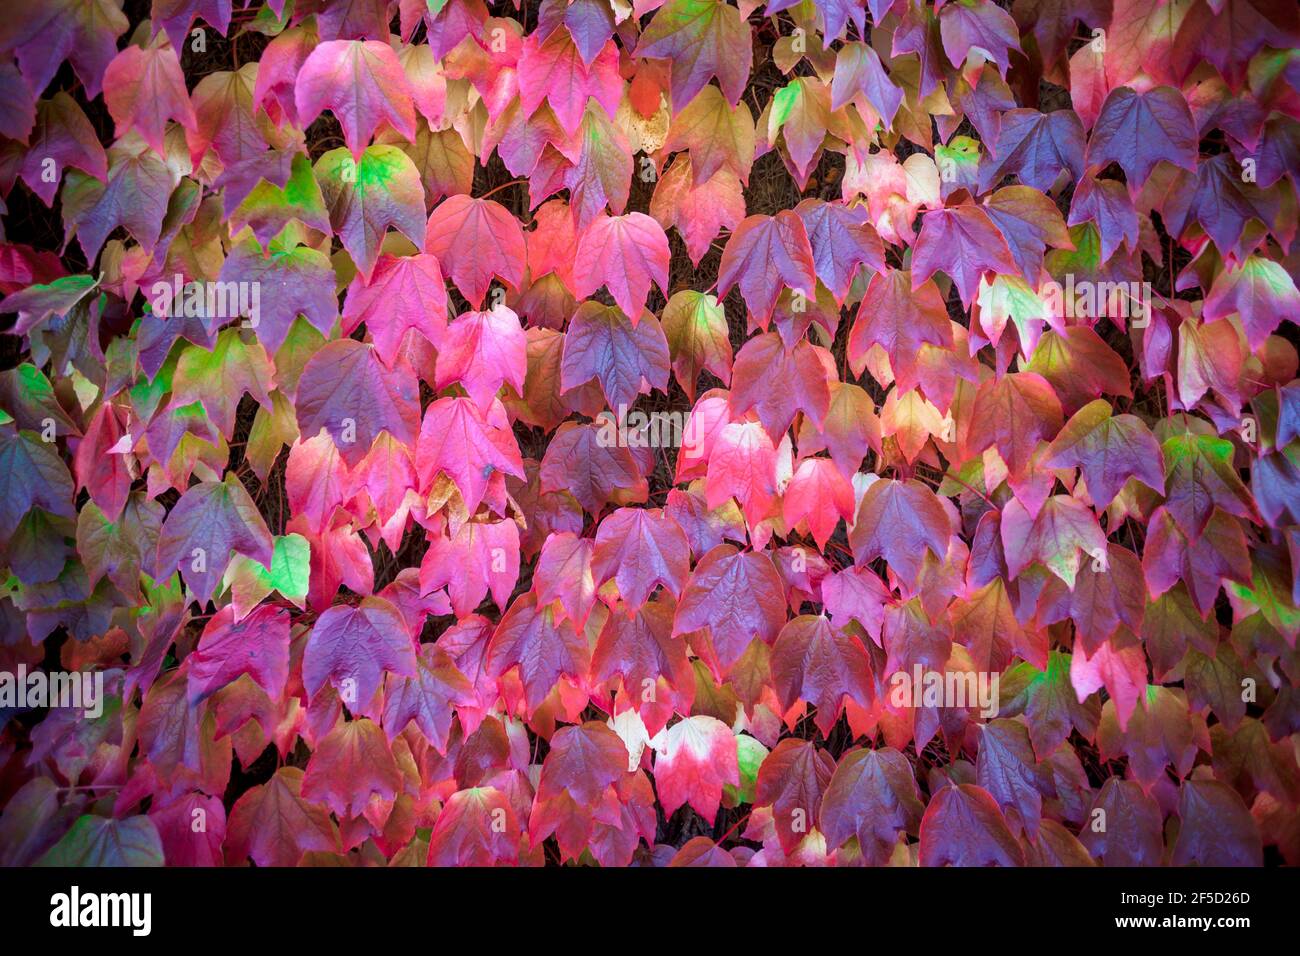 Autumn coloured Boston Ivy or Japanese Creeper growing against a wall, England Stock Photo